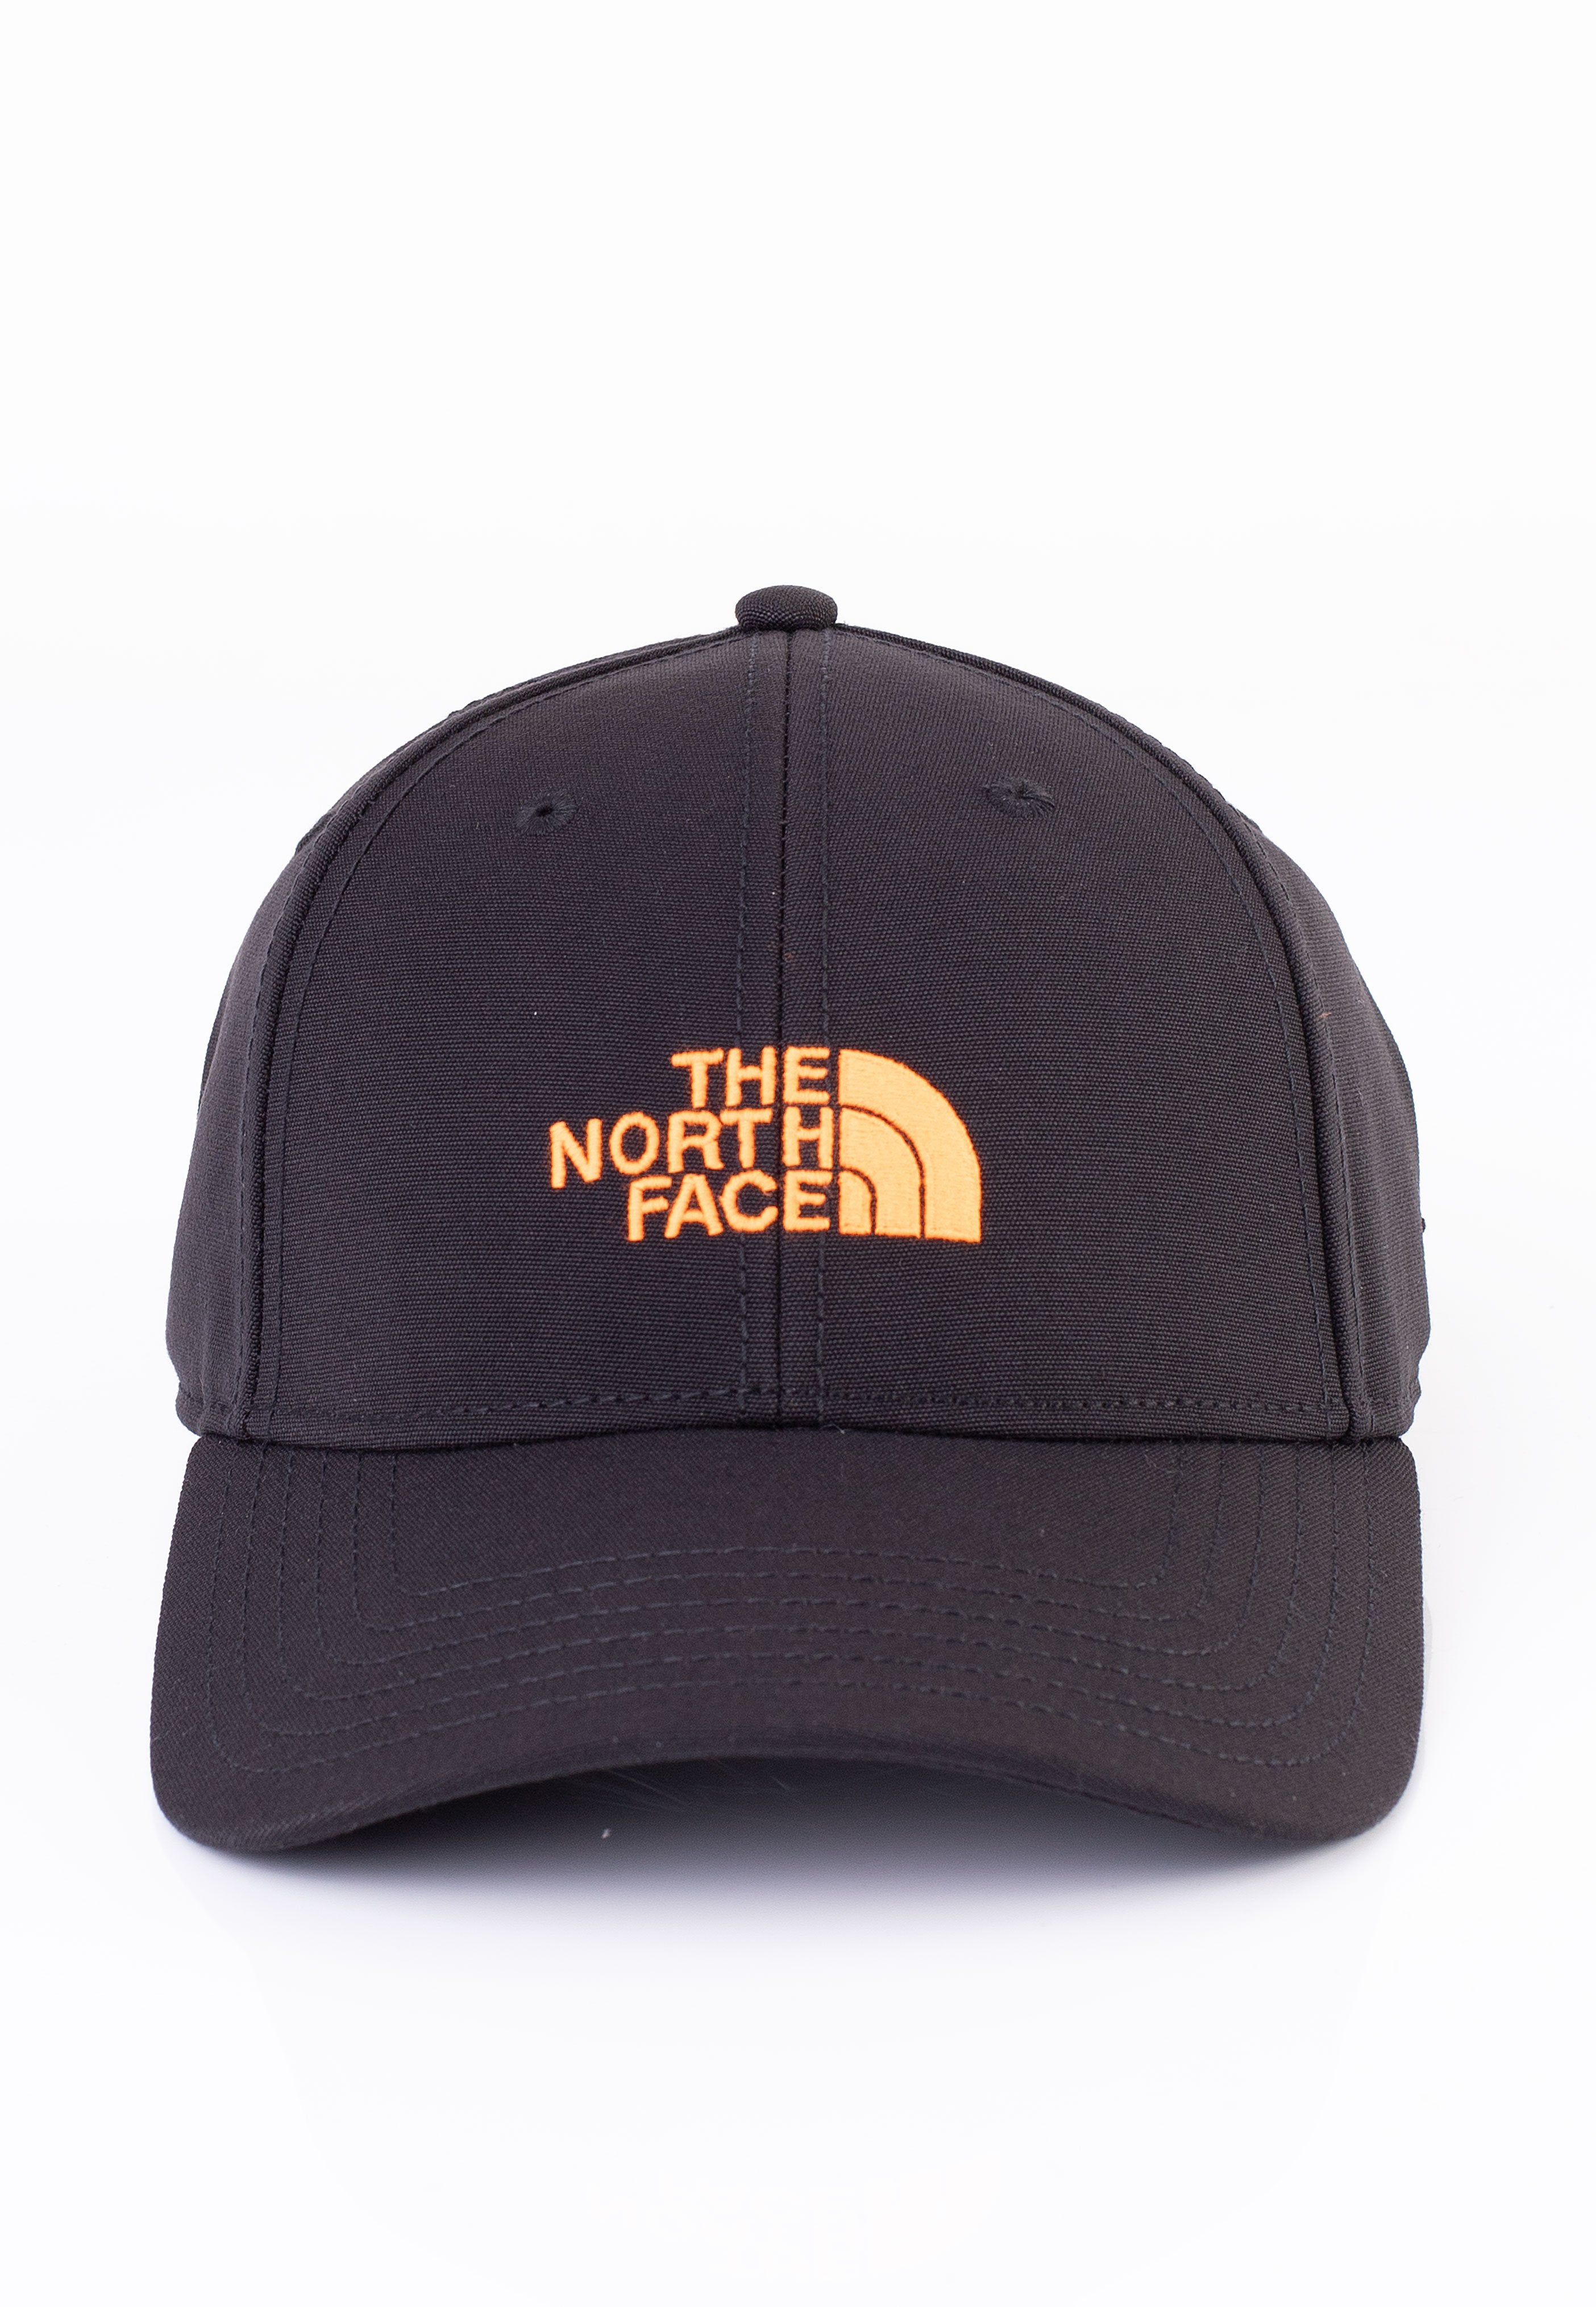 The North Face - Recycled 66 Classic Tnf Black/Vivid Flame - Cap